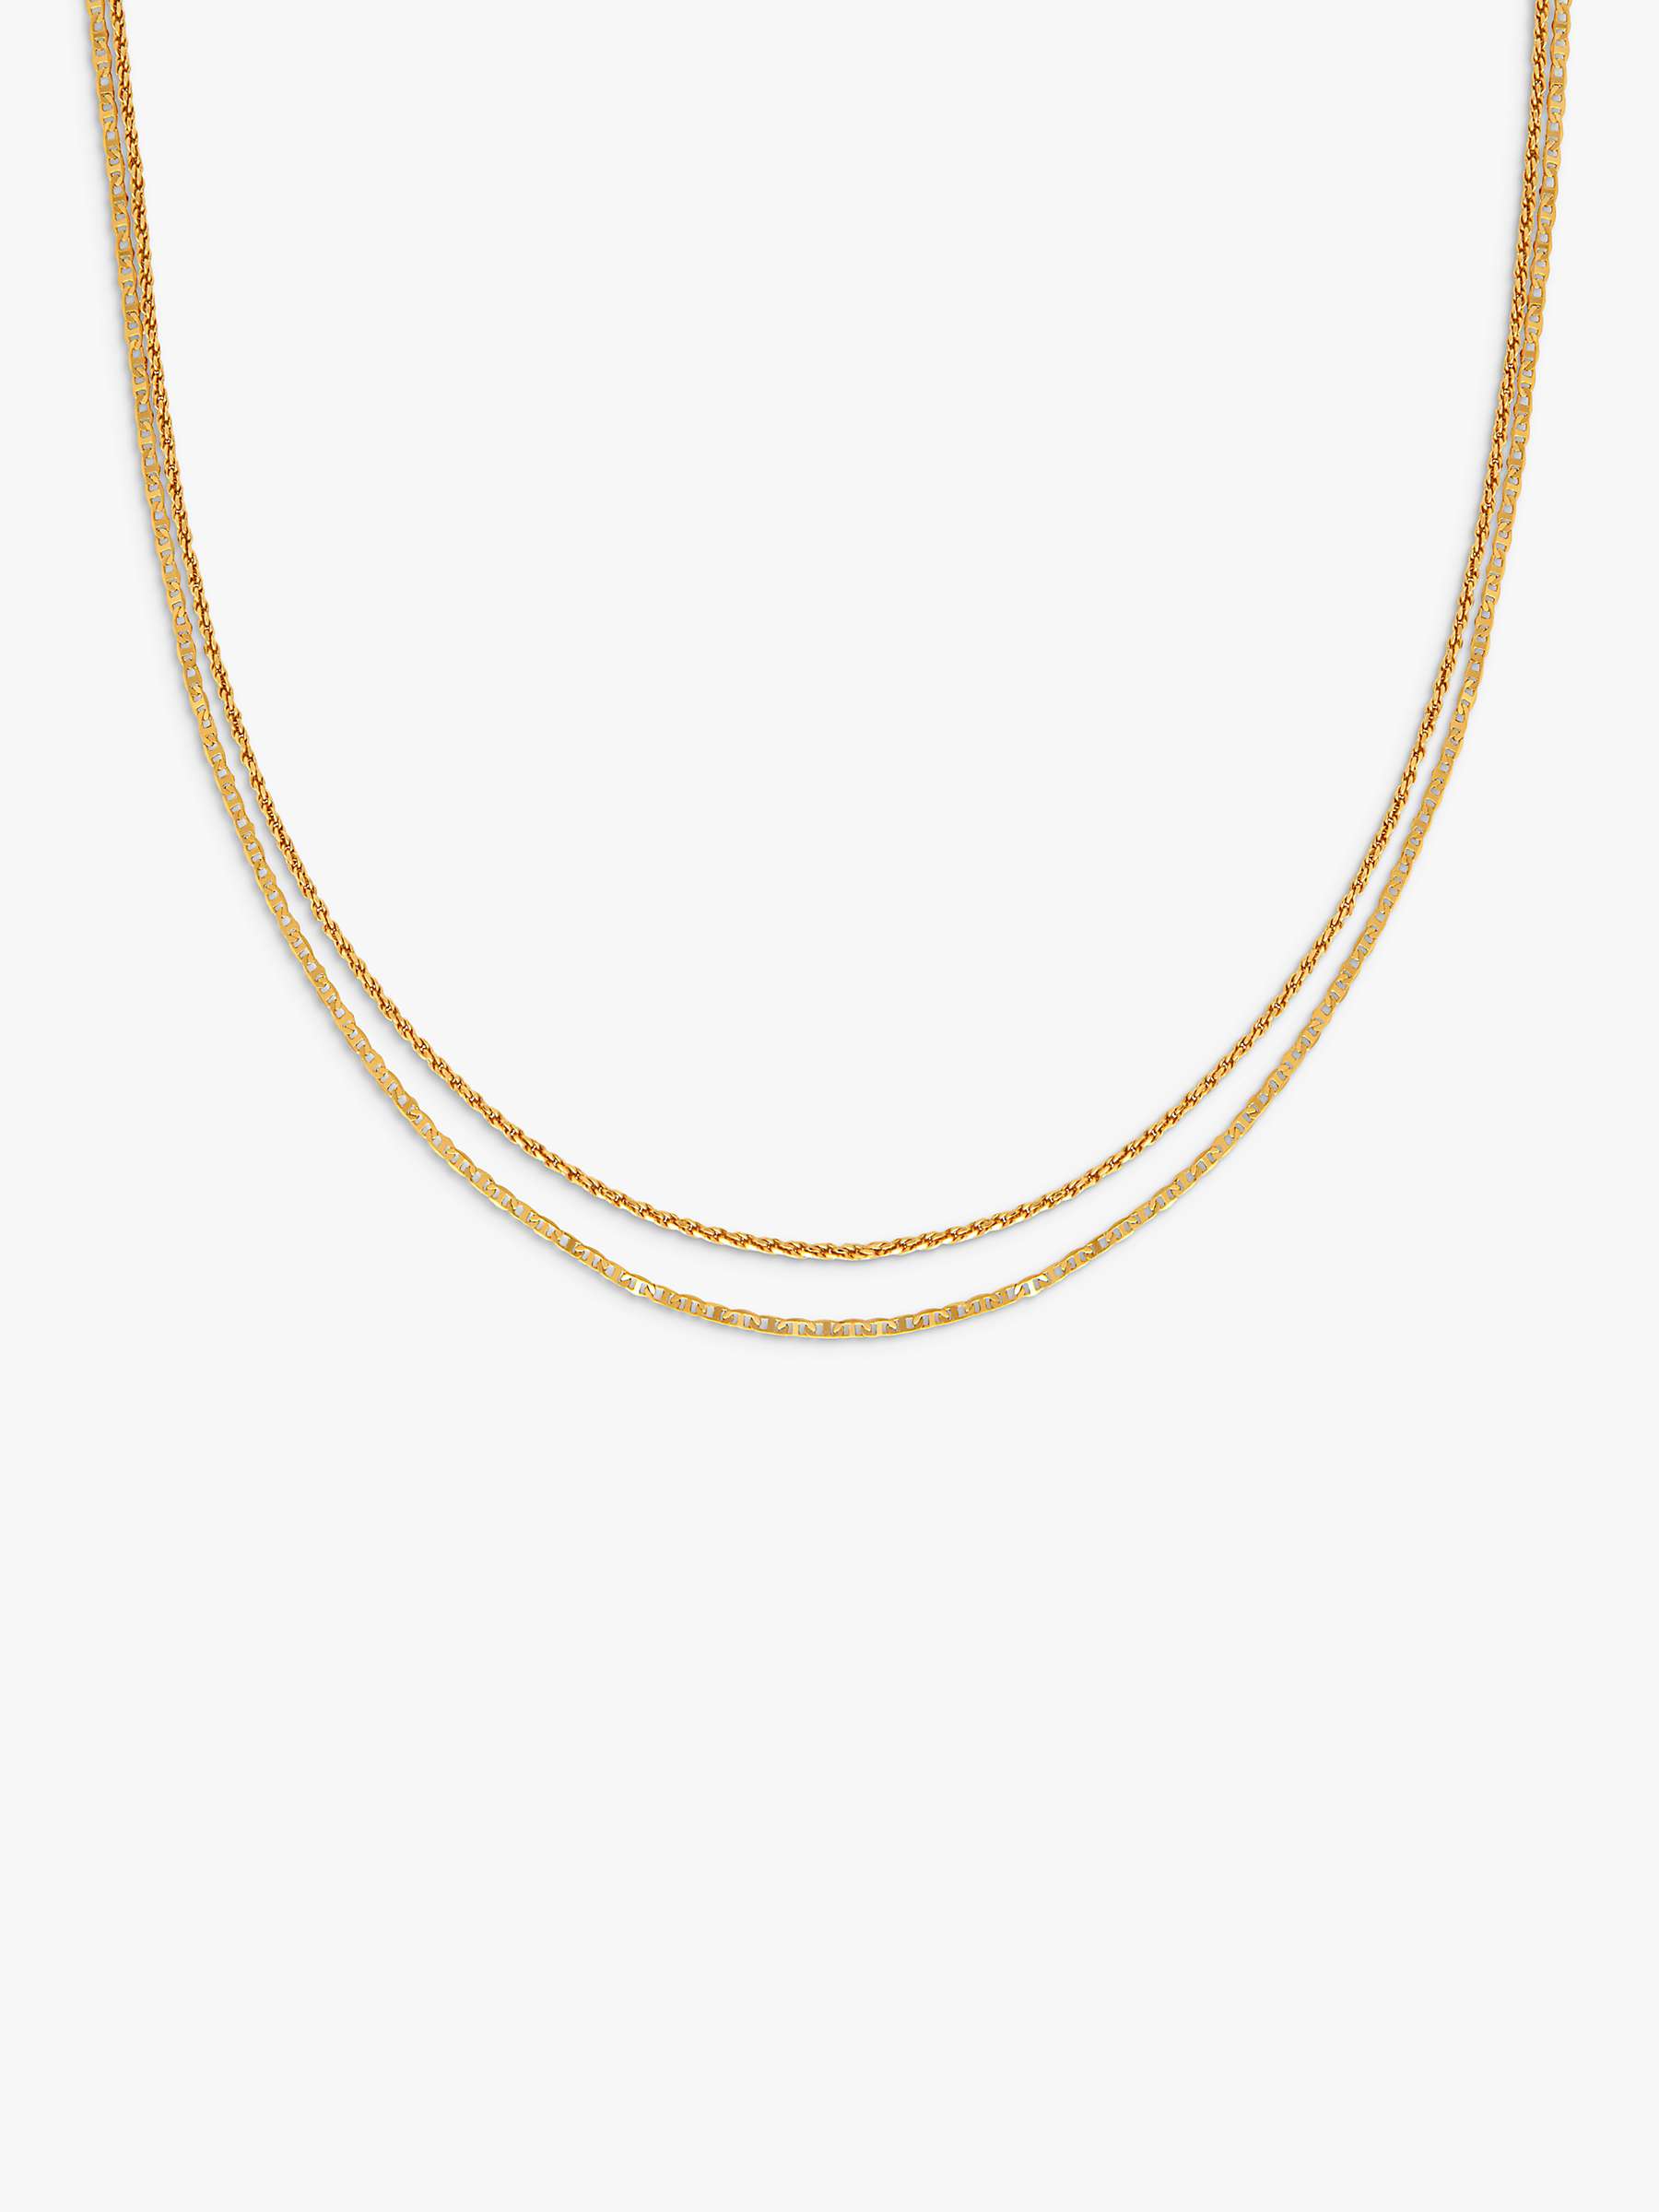 Buy Astrid & Miyu Duo Chain Necklace, Gold Online at johnlewis.com